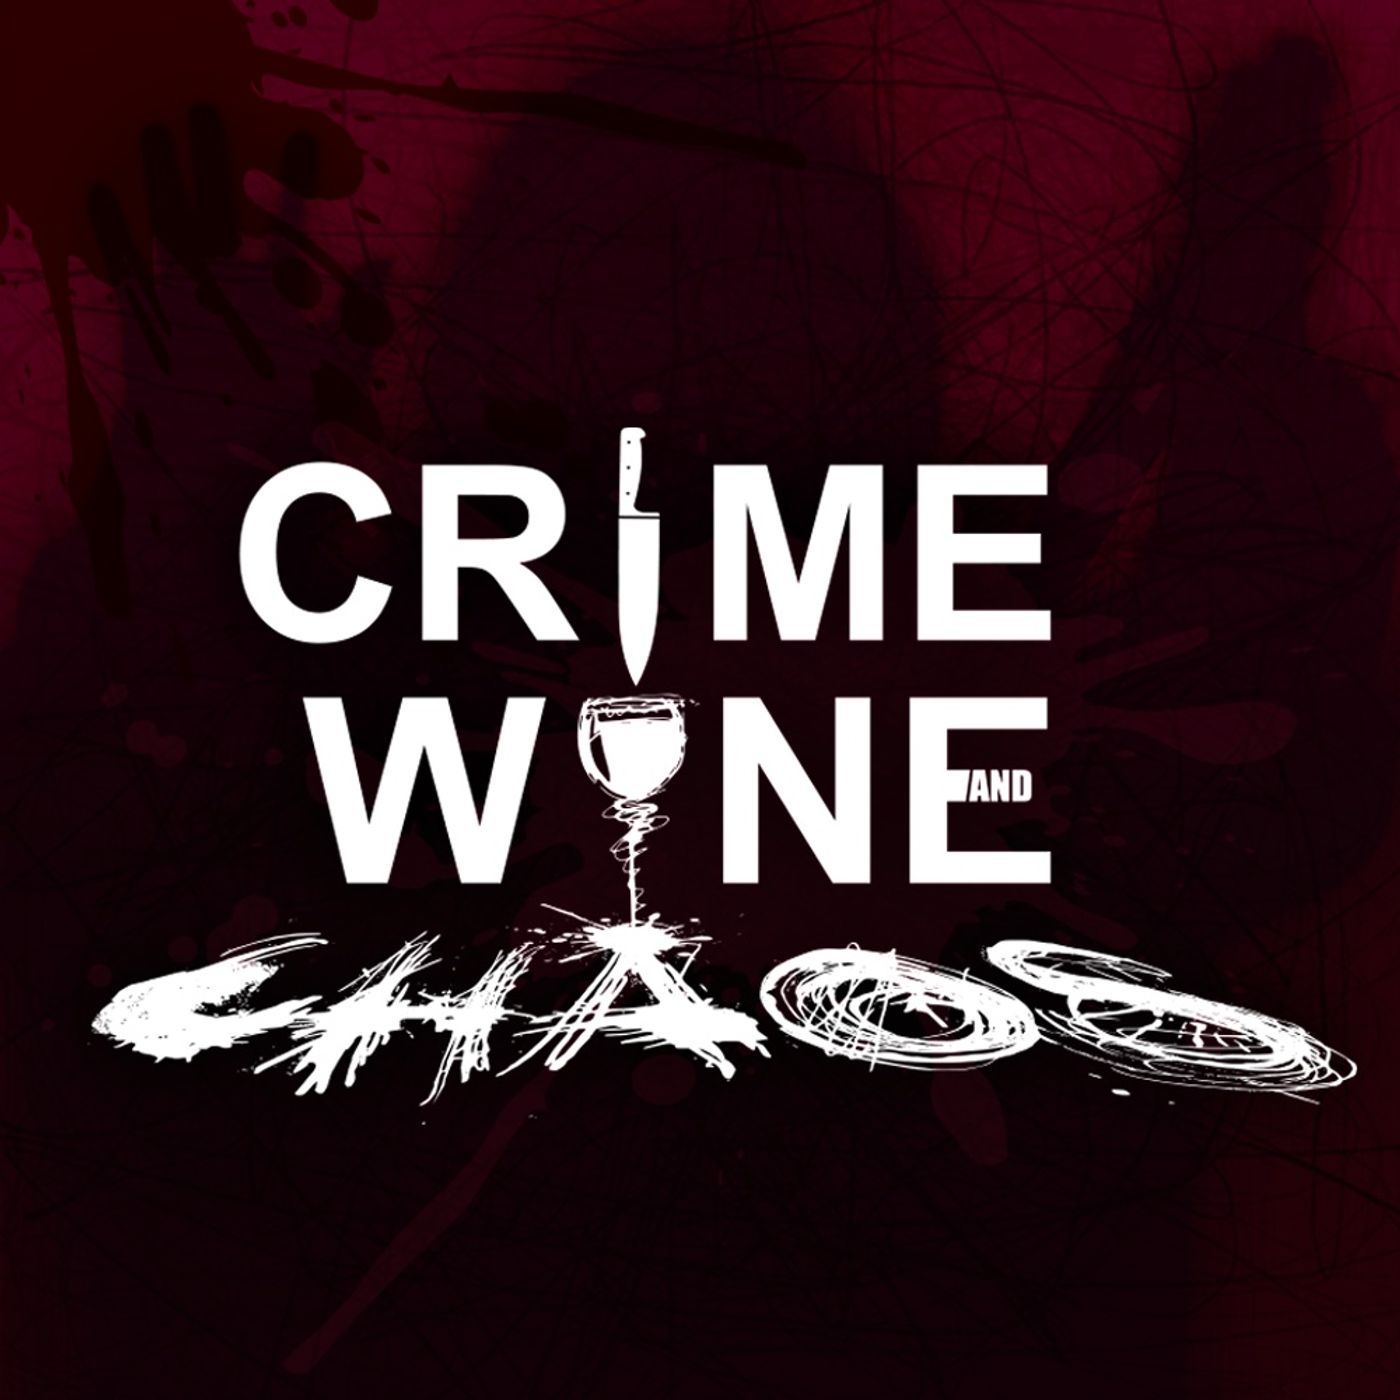 The Survival Story of Katy Sharp and The Free Town Project by Crime Wine and Chaos